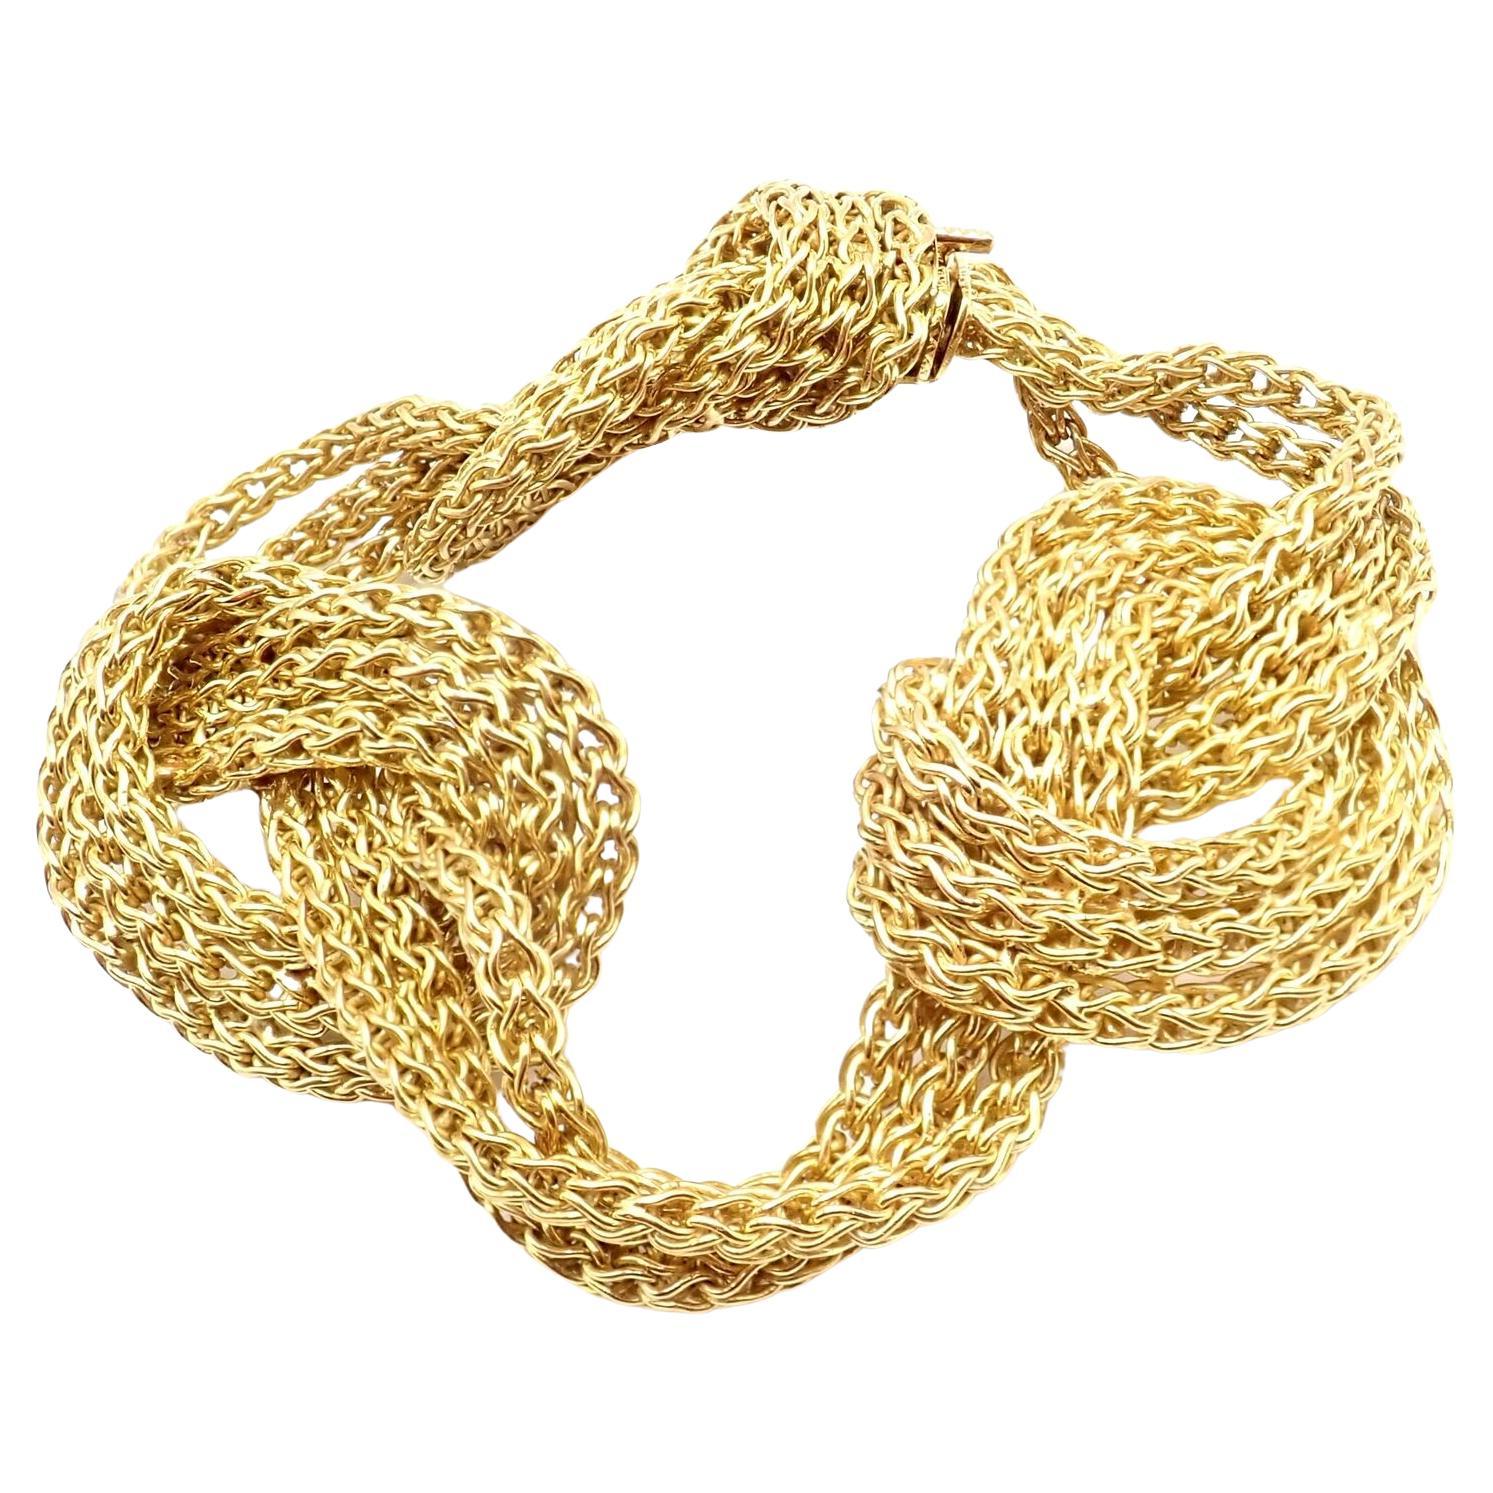 Vintage Tiffany & Co Woven Knot Yellow Gold Link Bracelet